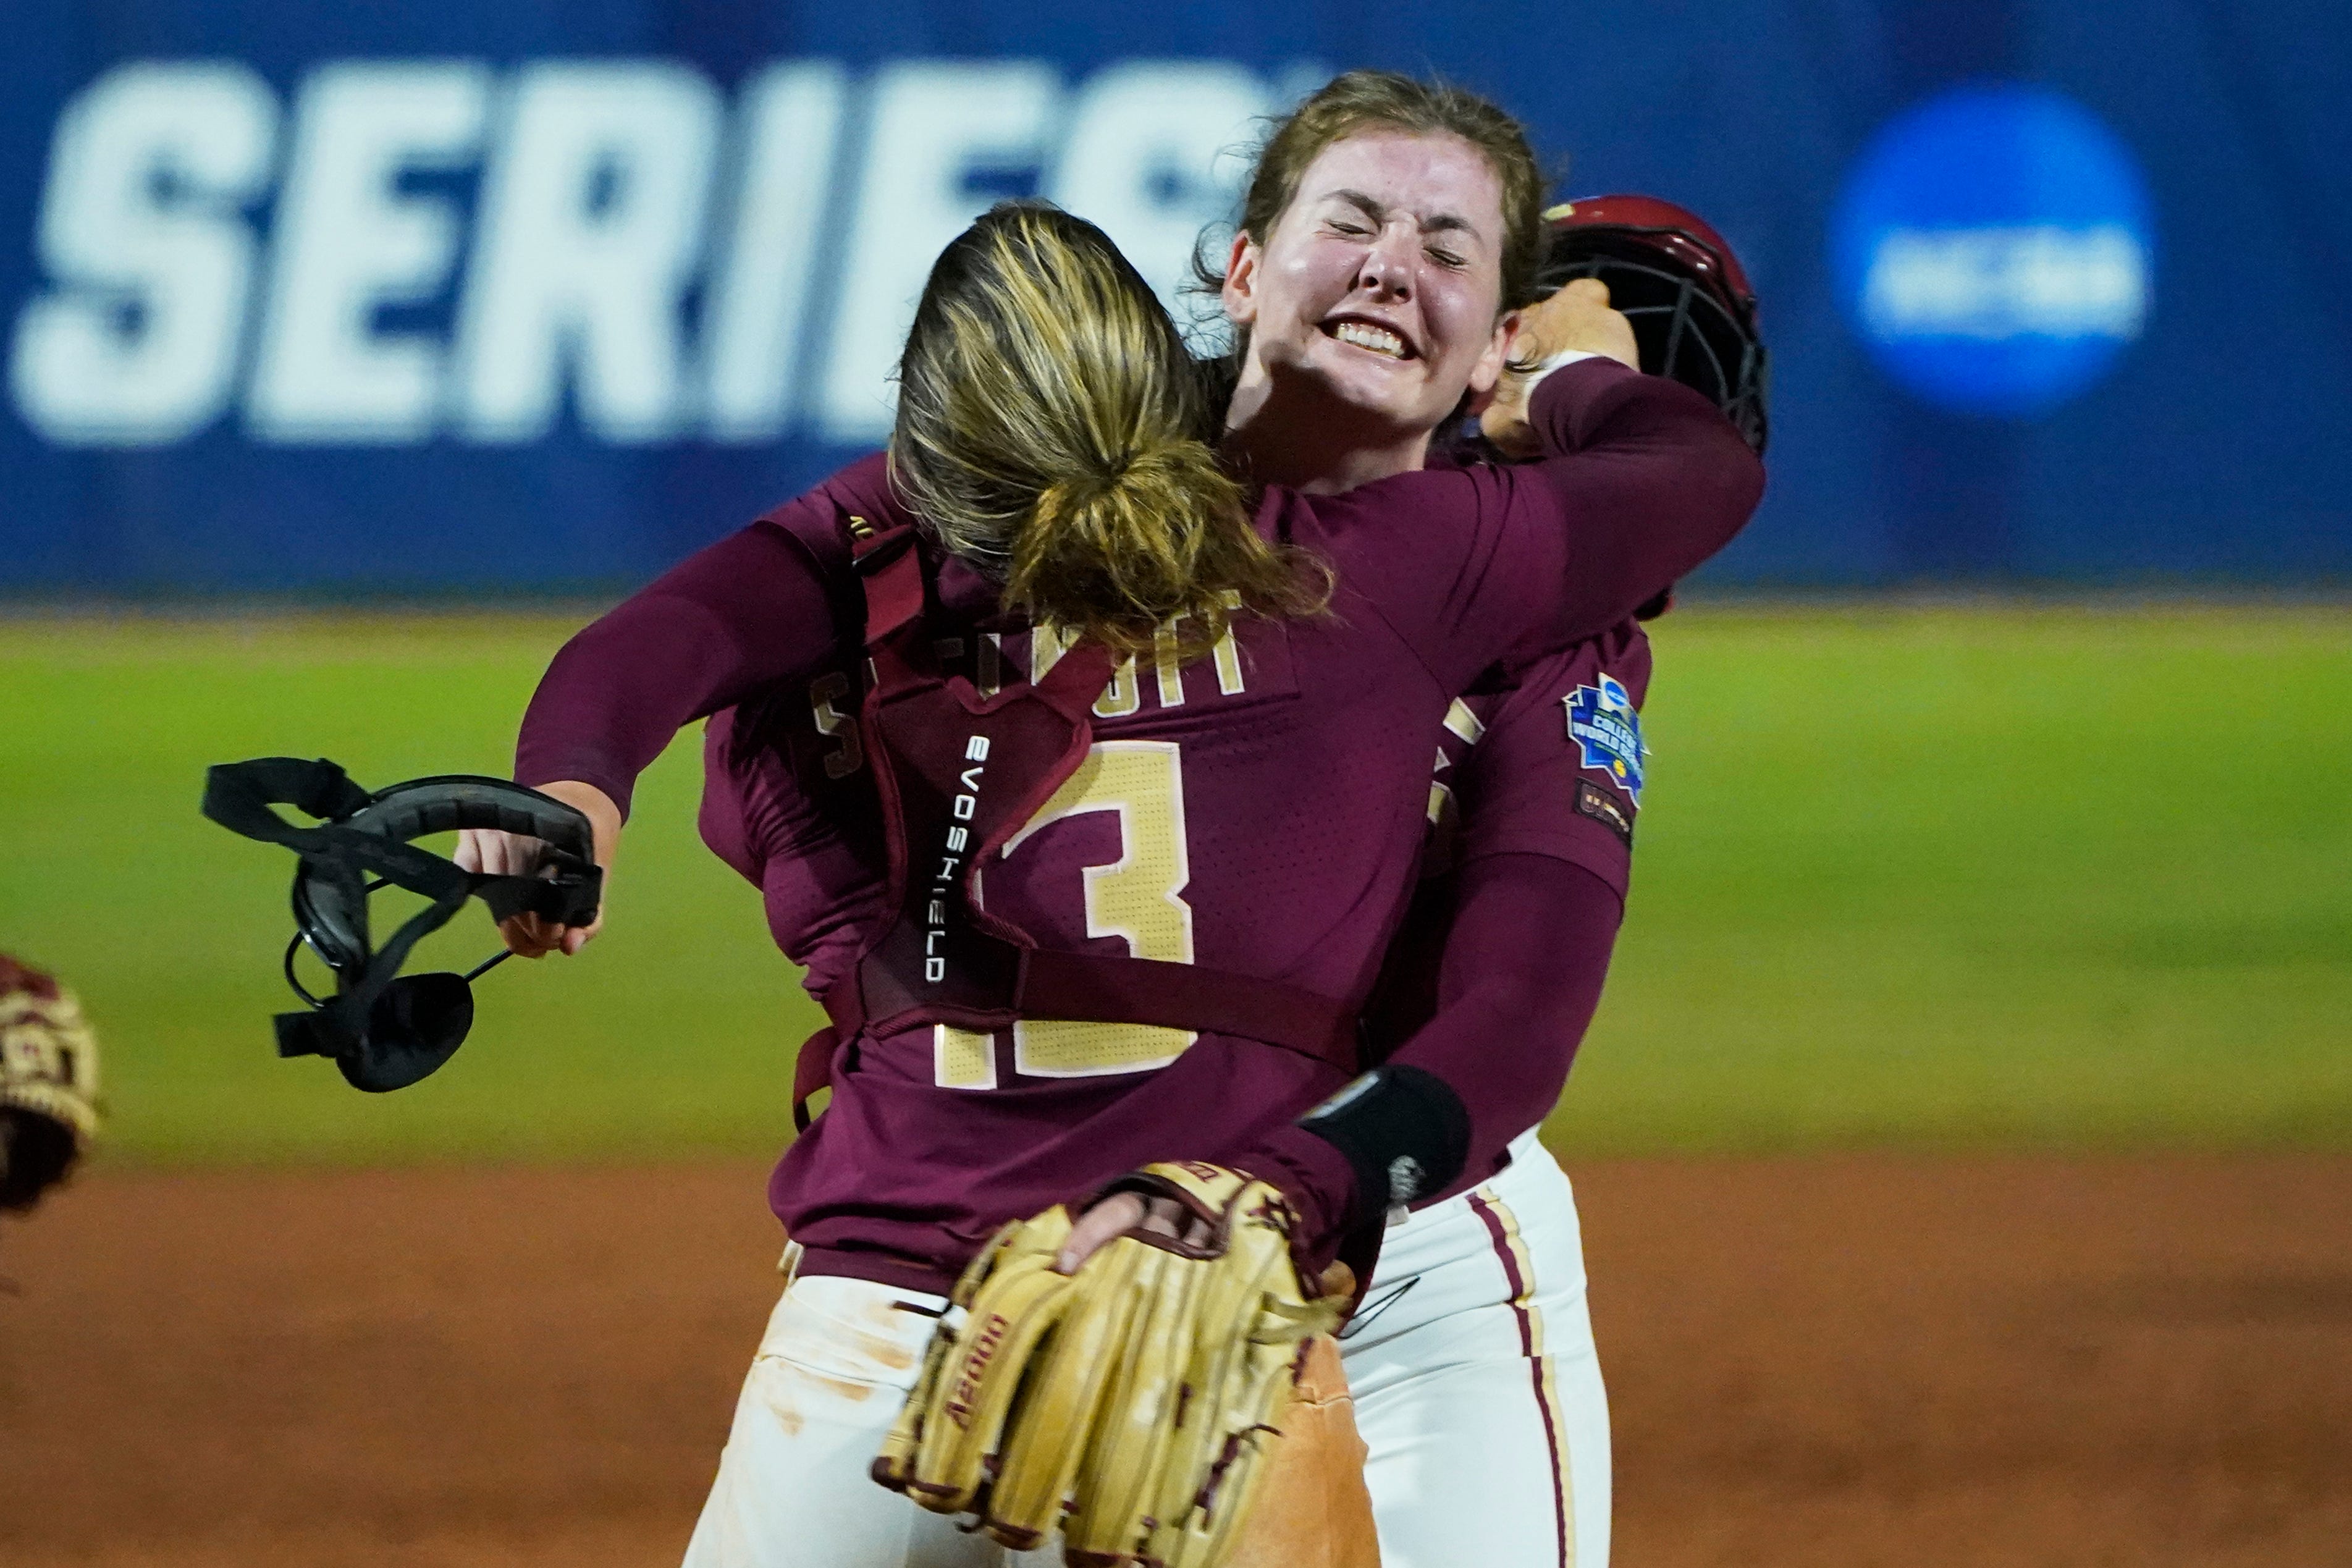 Fsu Wins Wcws Championship Opener Over Ou One Win Away From National Title